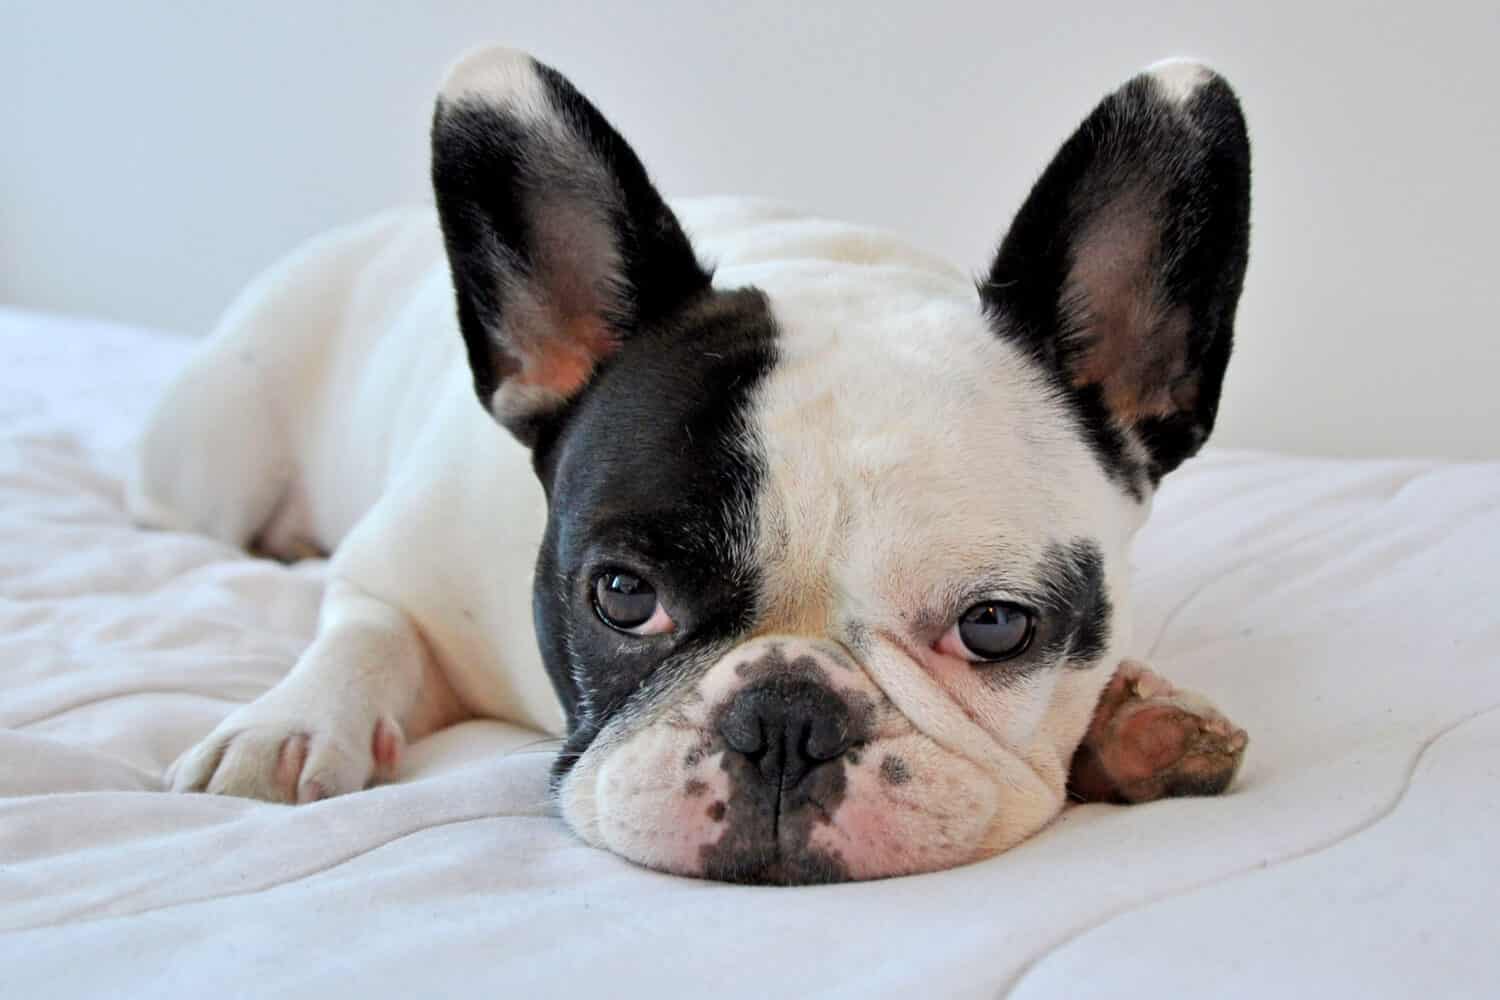 Manhattan, New York City - July 3, 2010: A pied colored French Bulldog rests comfortably on a bed.